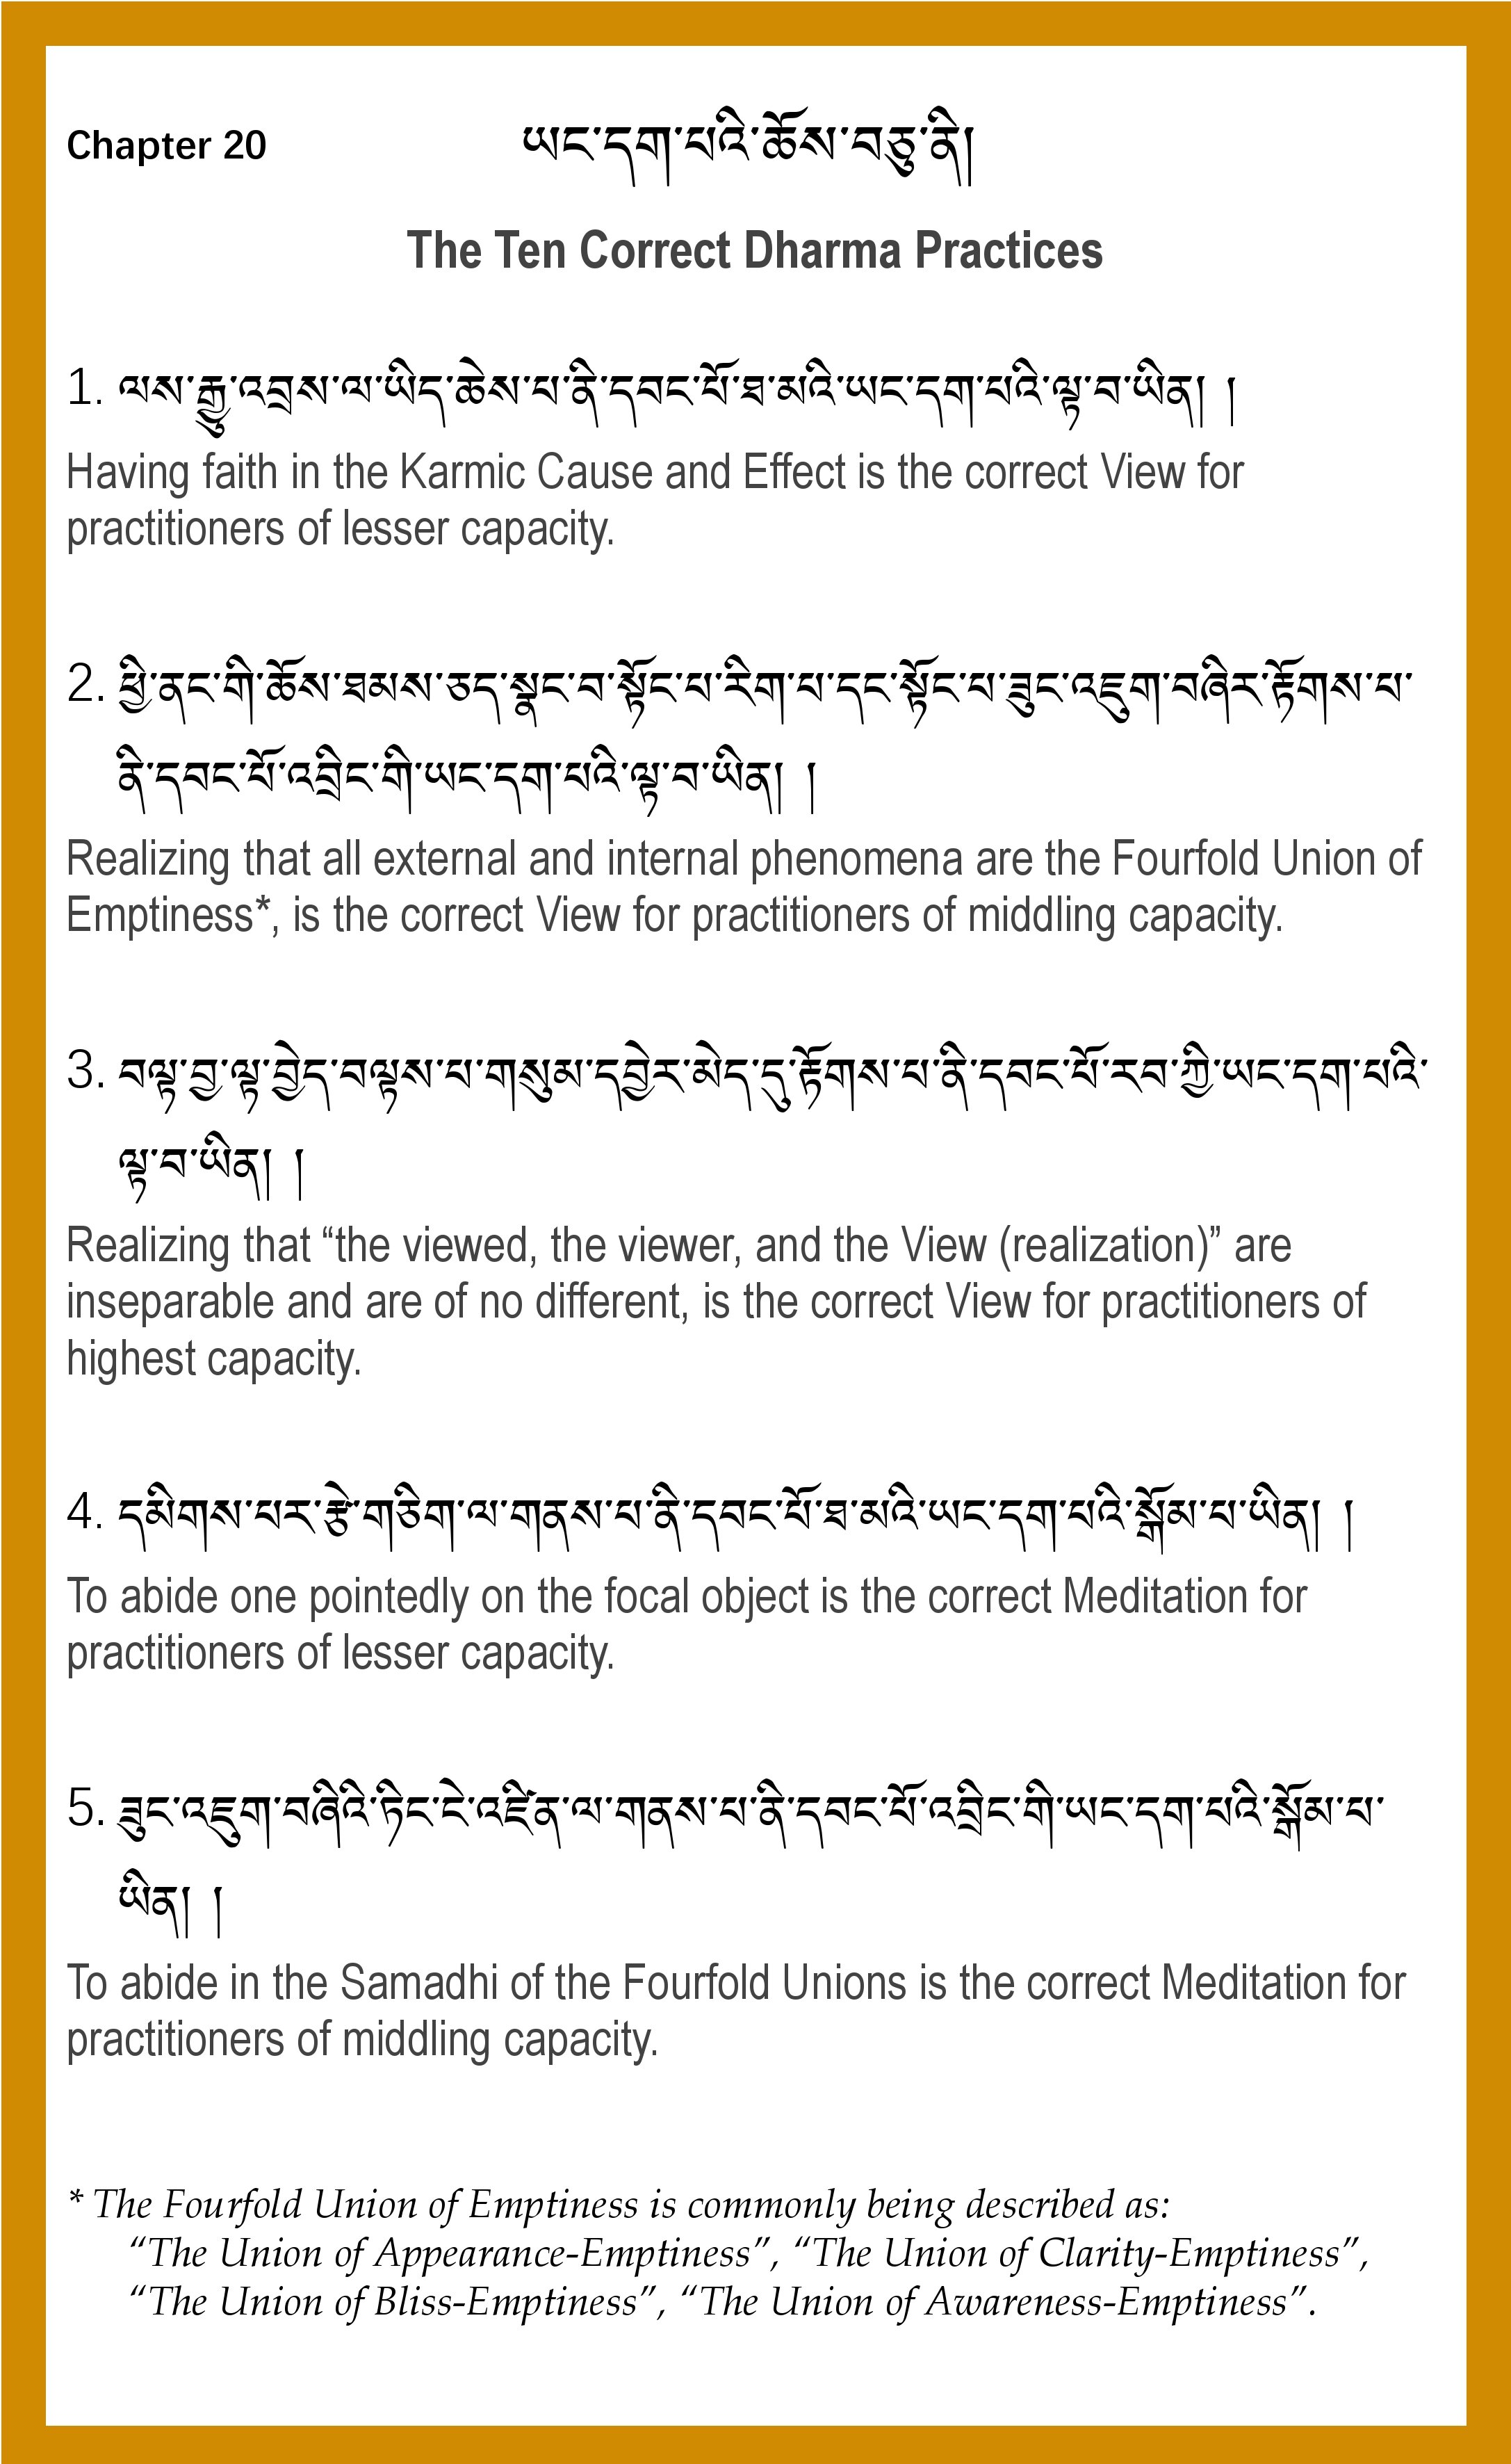 20-PGSP-The 10 Correct Dharma Practices0003.jpg